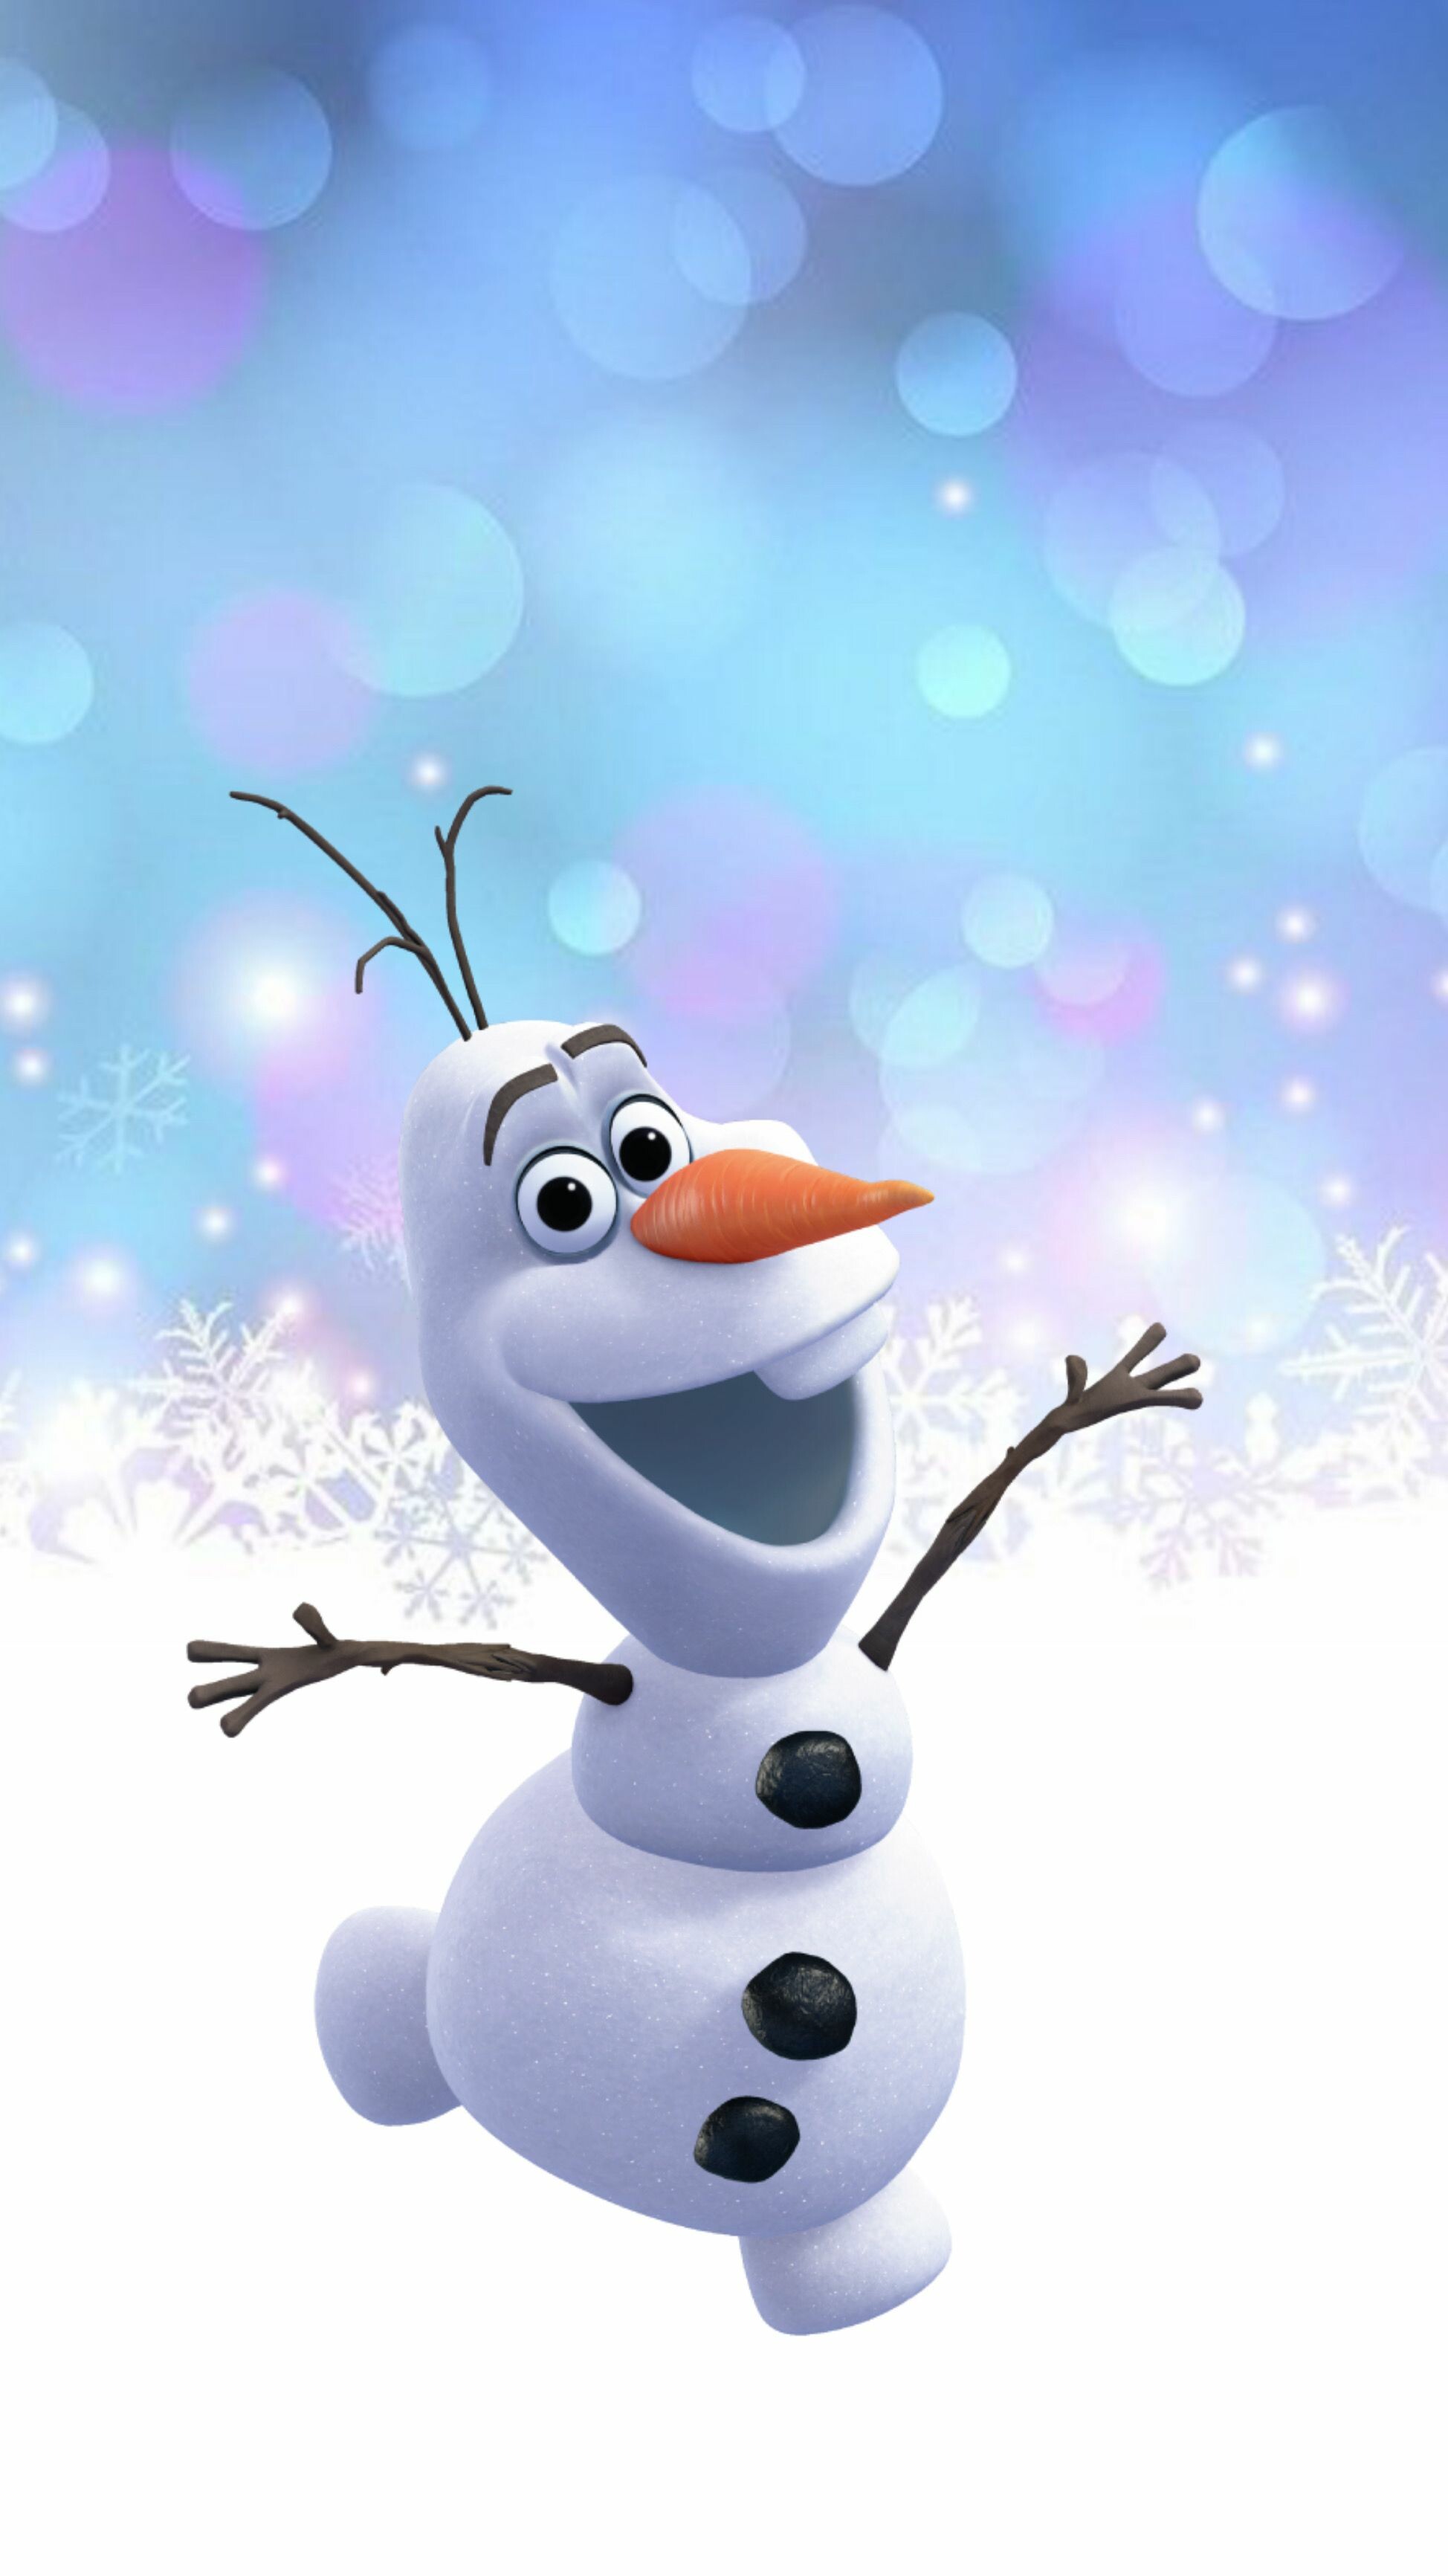 Frozen: Josh Gad as Olaf, a sentient comic-relief snowman that Elsa and Anna created as children, who dreams of experiencing summer. 1950x3470 HD Background.